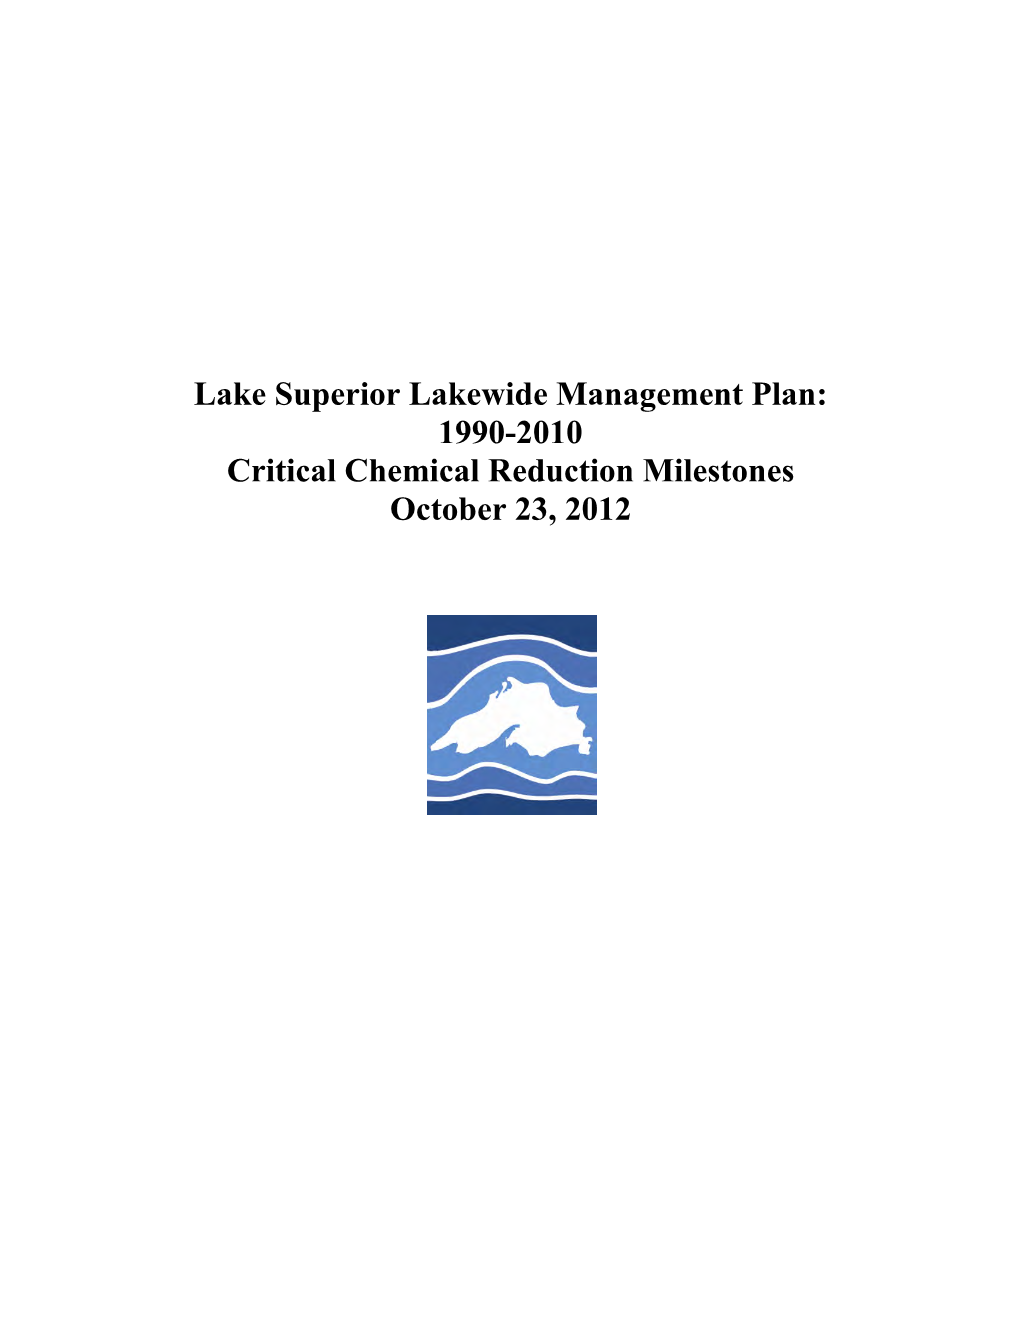 Lake Superior Lakewide Management Plan: 1990-2010 Critical Chemical Reduction Milestones October 23, 2012